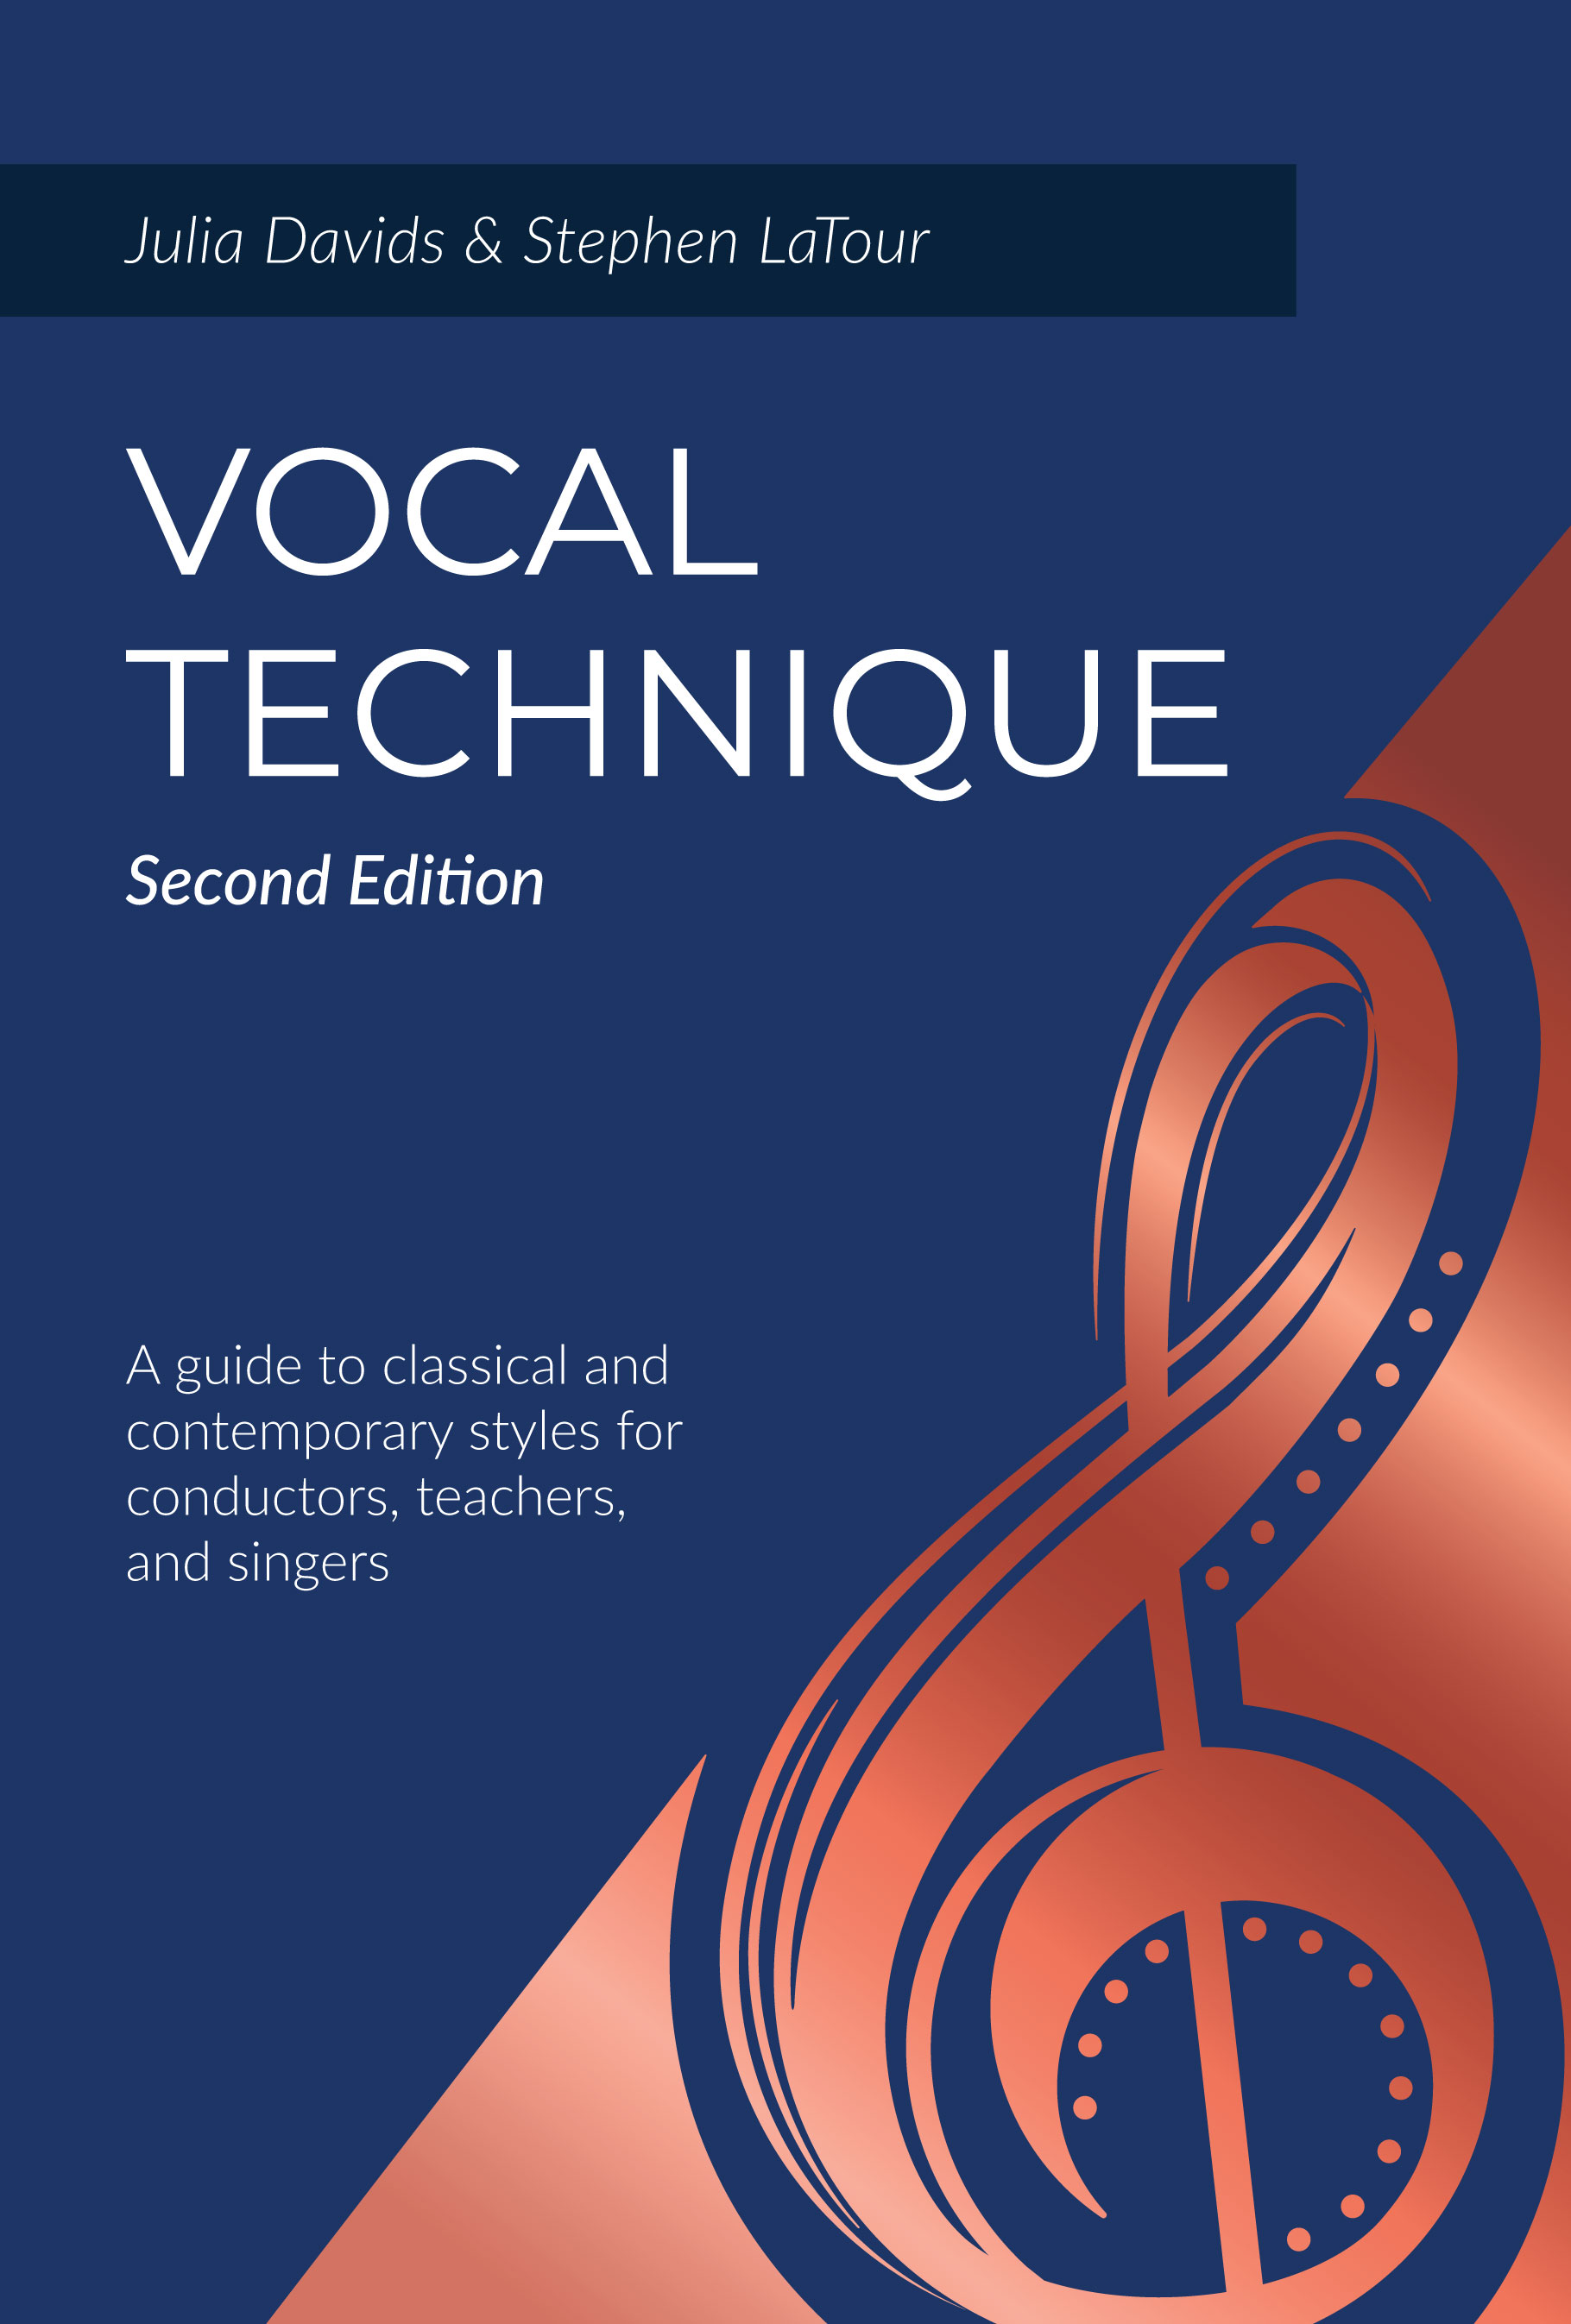 Vocal Technique: A Guide to Classical and Contemporary Styles for Conductors, Teachers, and Singers, Second Edition by Julia  Davids, Stephen  LaTour